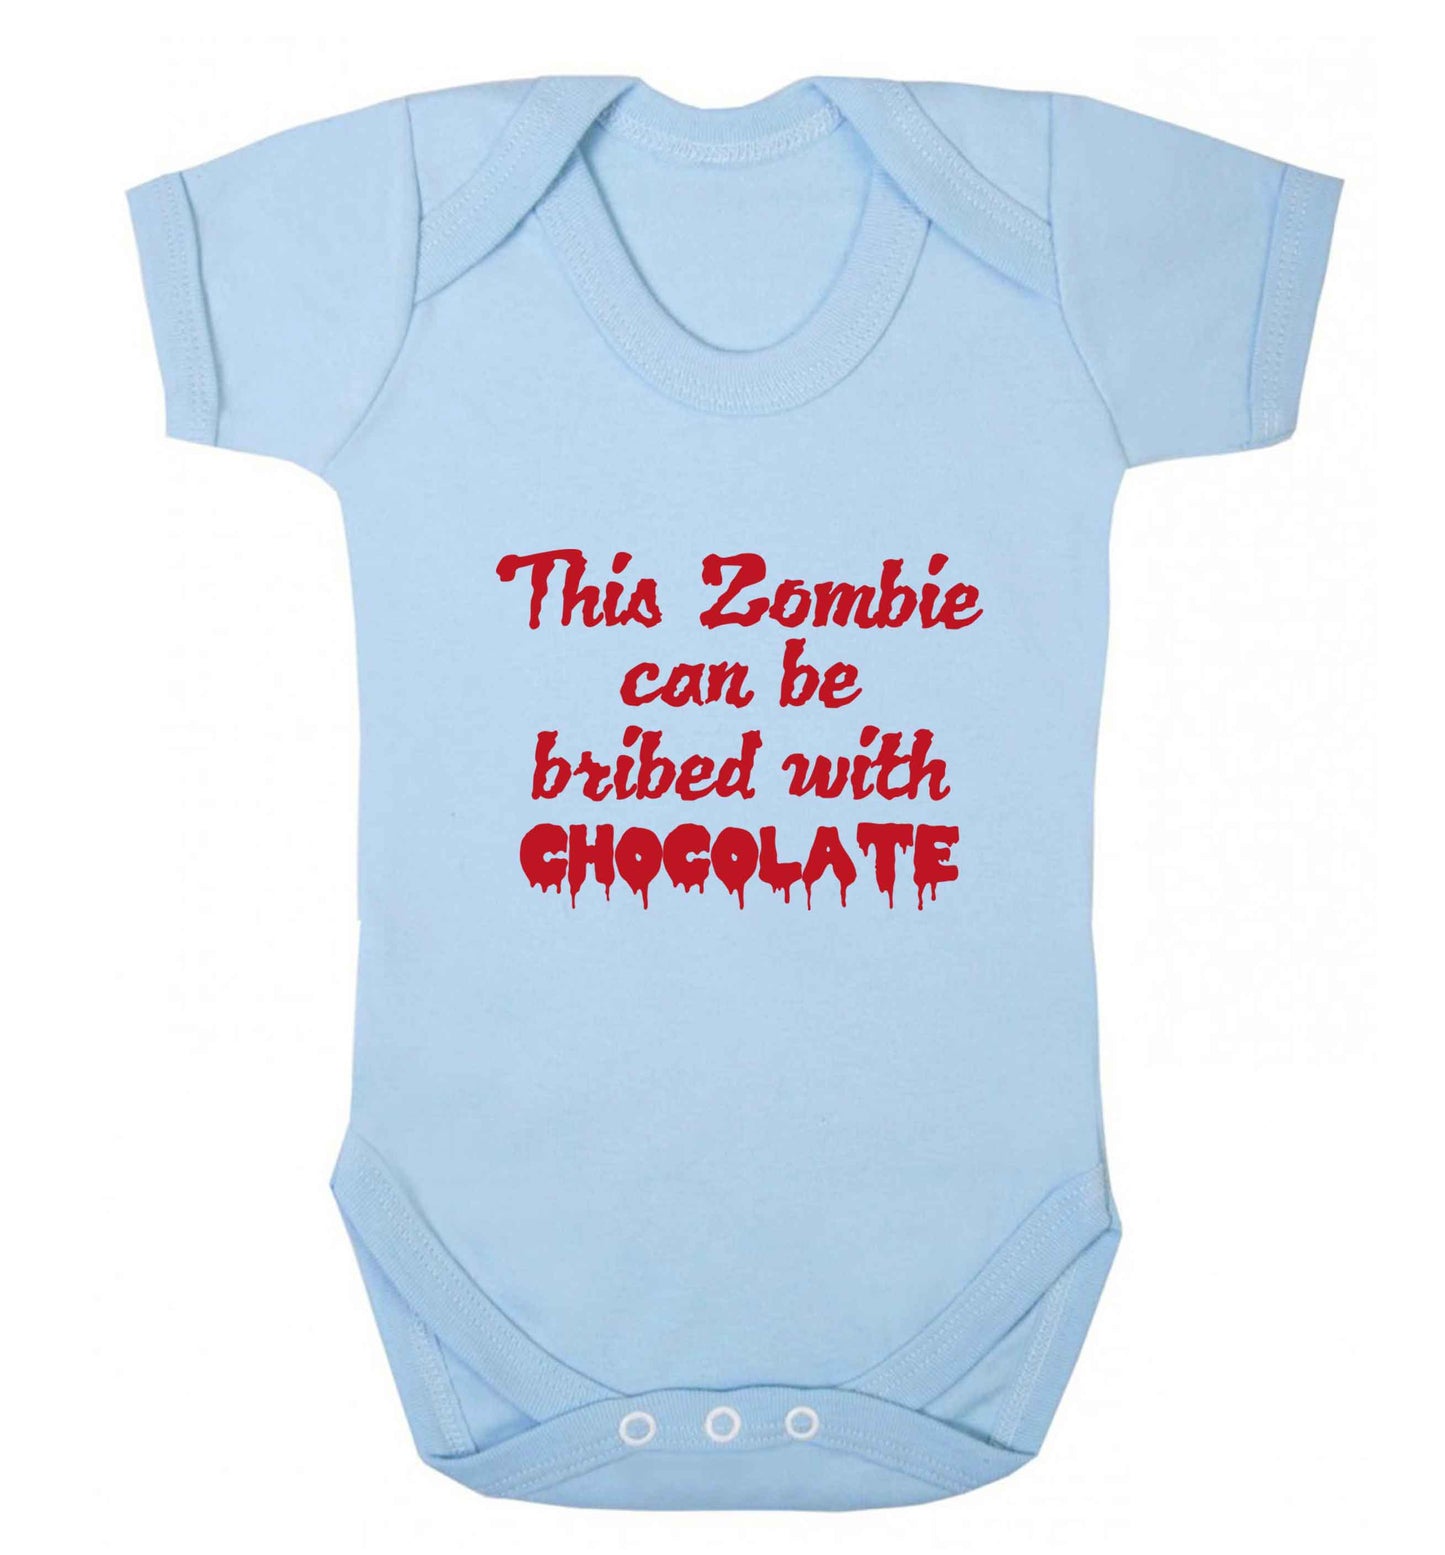 This zombie can be bribed with chocolate baby vest pale blue 18-24 months